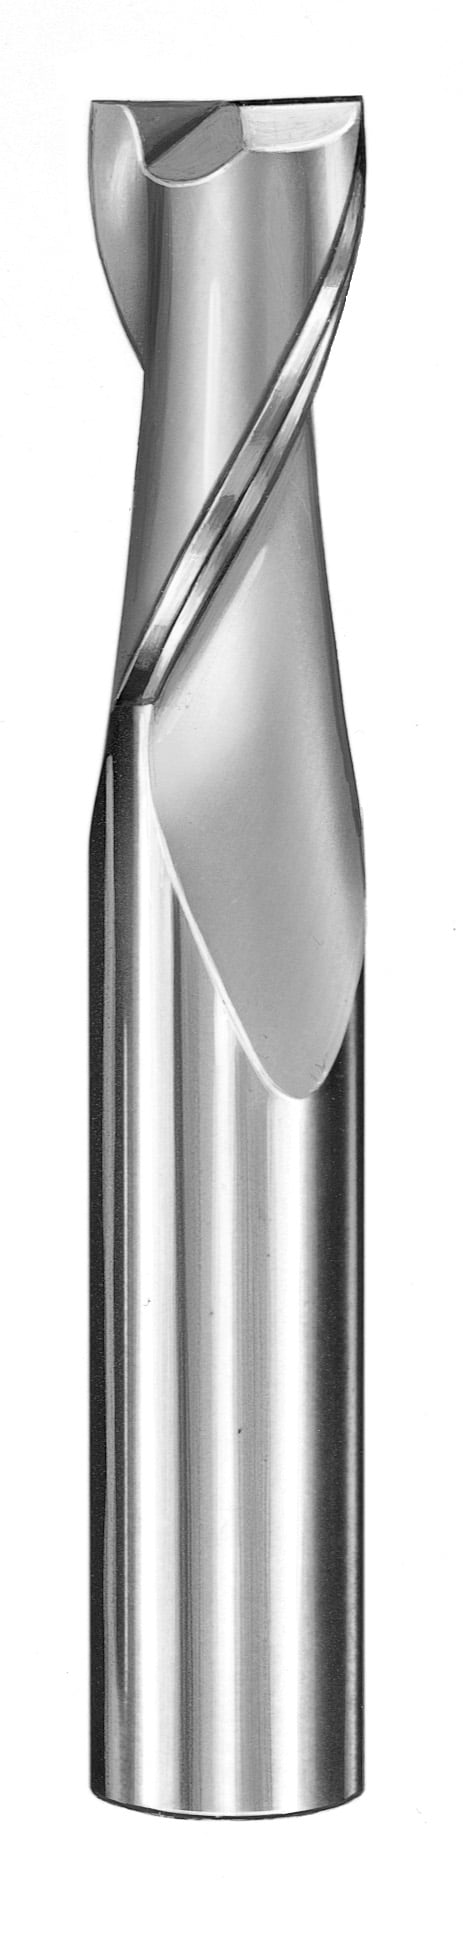 1/32" Dia, 2 Flute, Square End End Mill - 30303